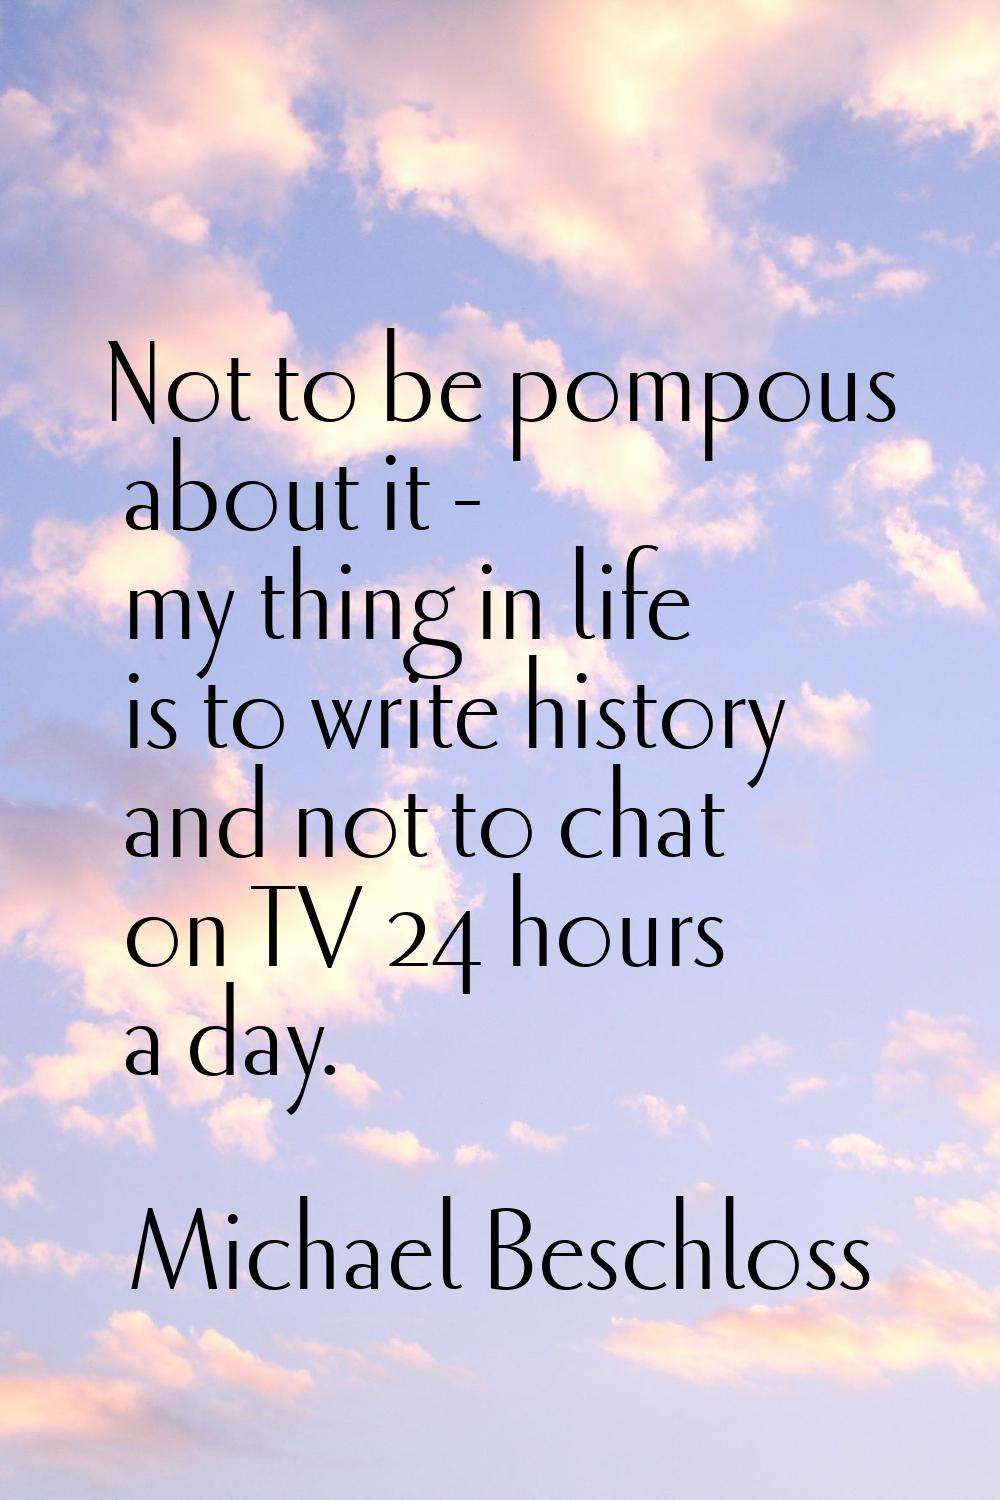 Not to be pompous about it - my thing in life is to write history and not to chat on TV 24 hours a 